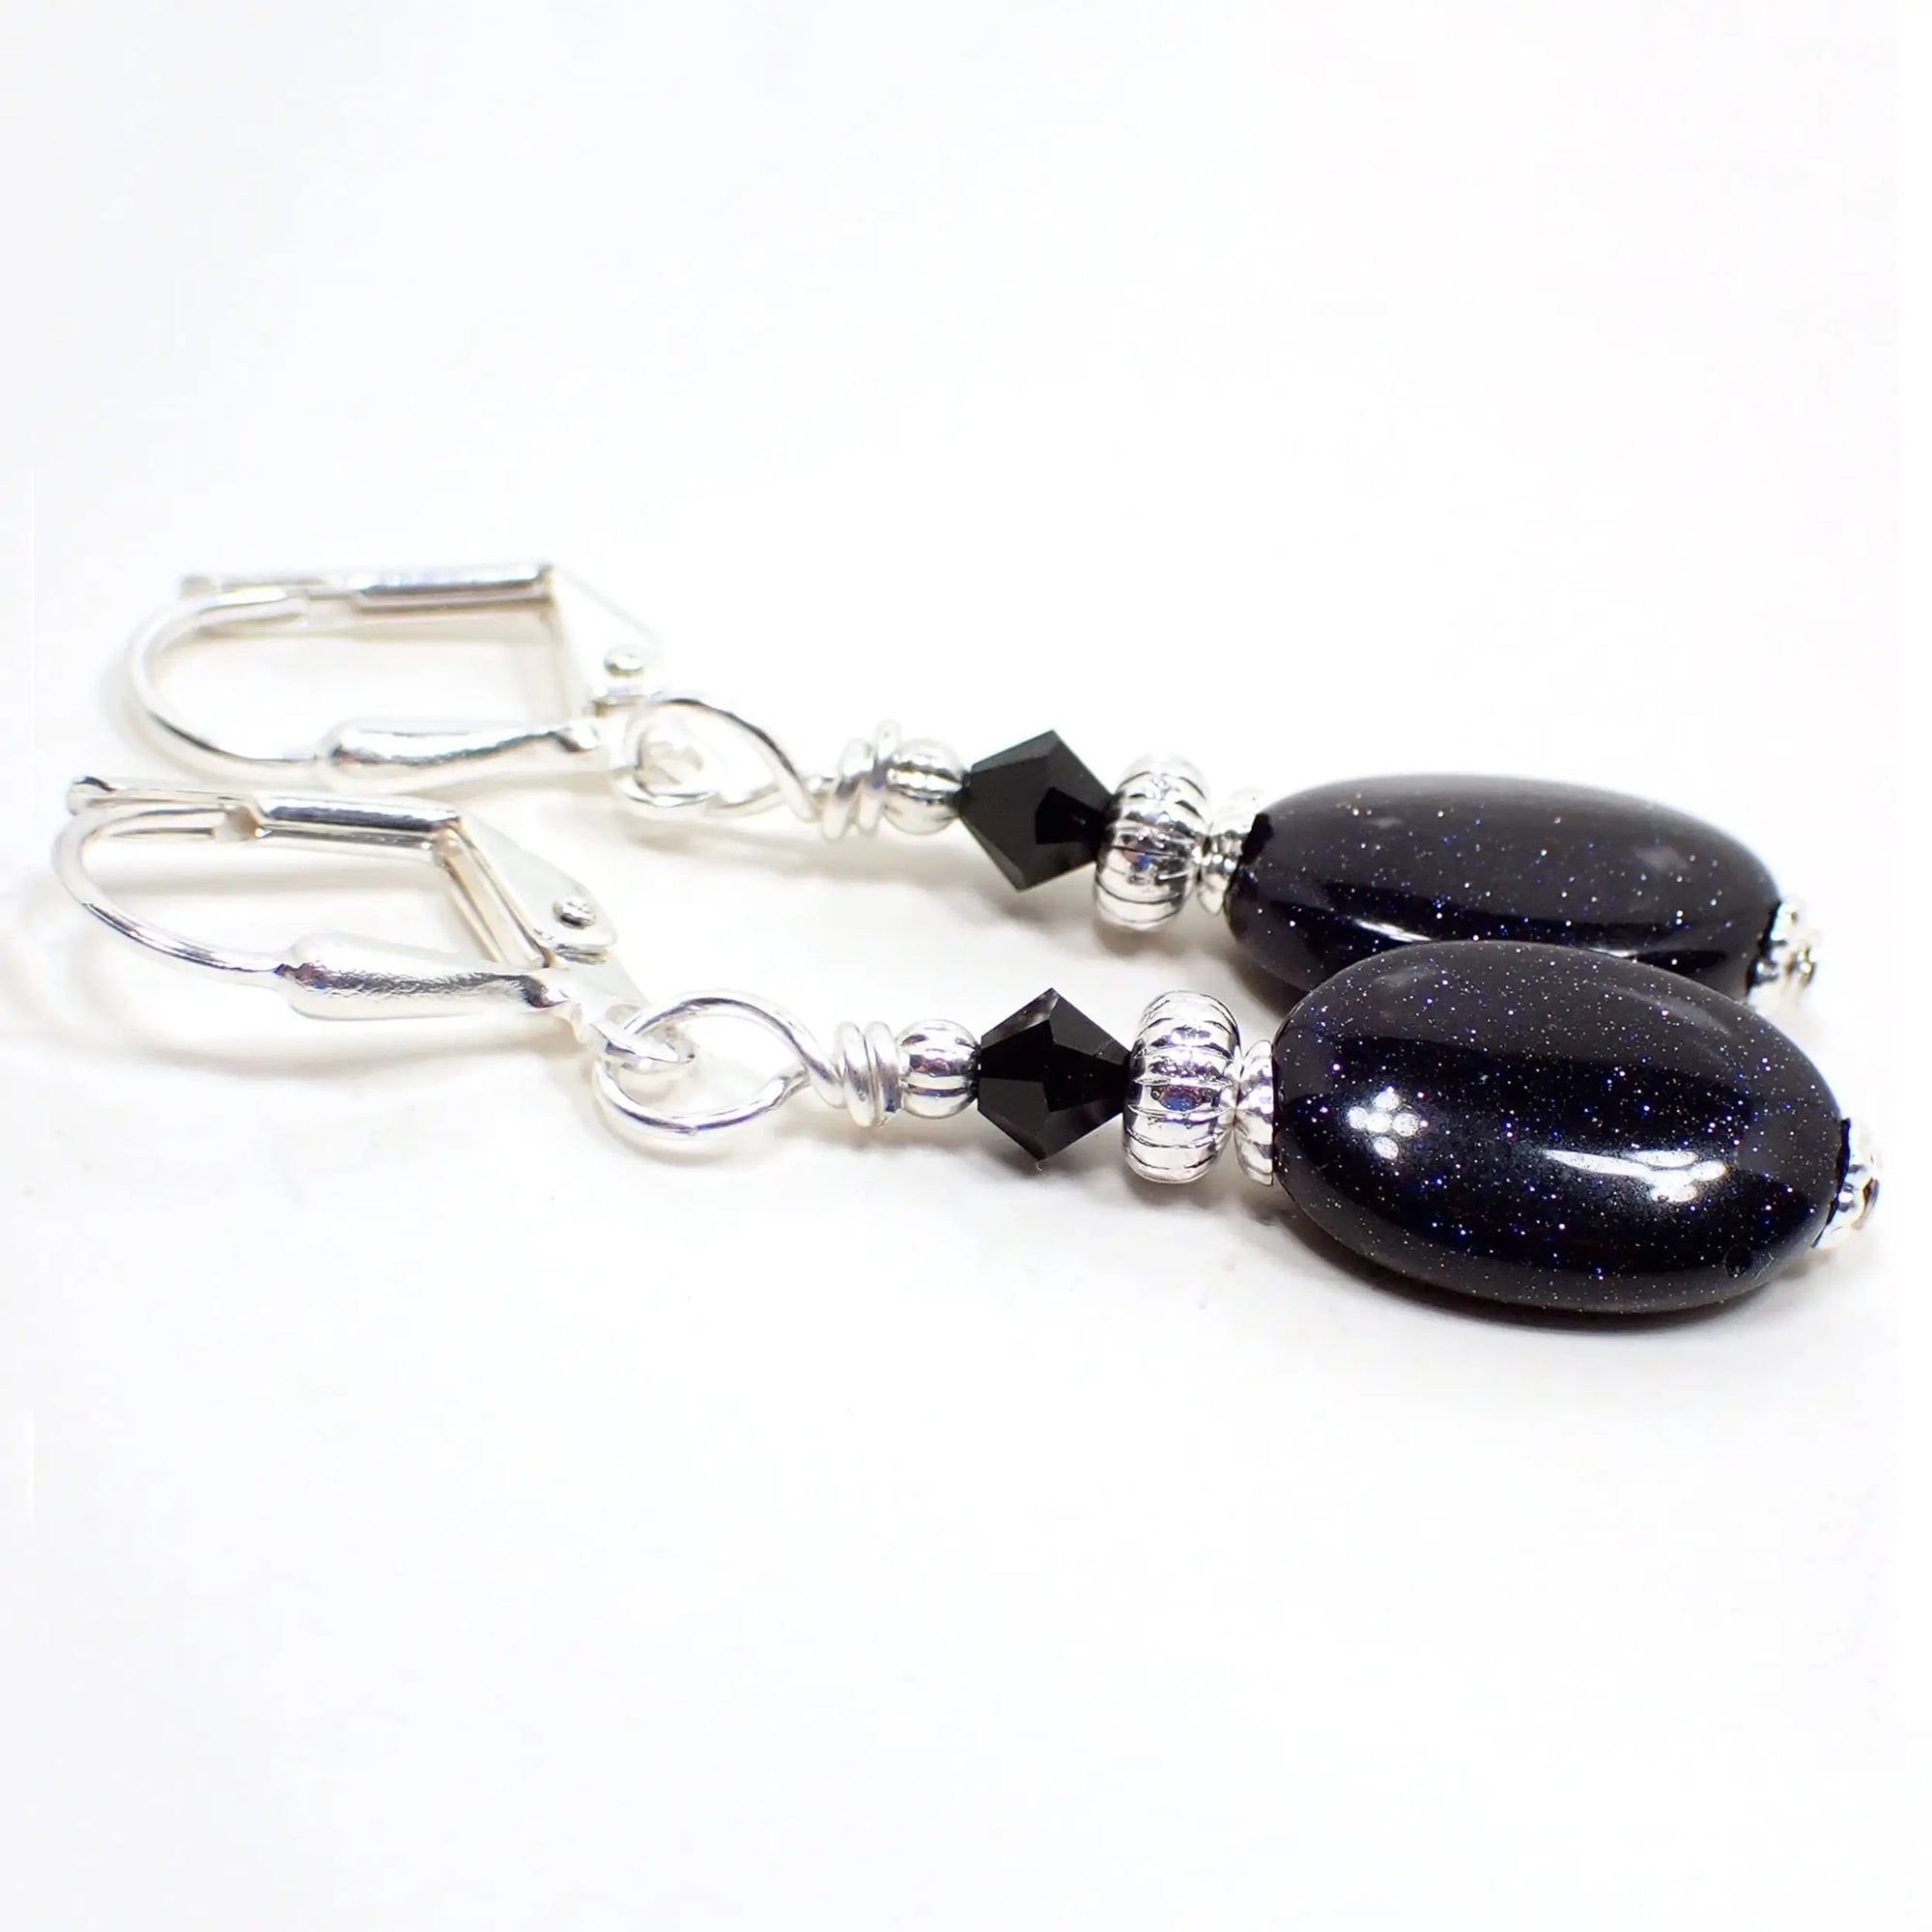 Angled view of the handmade blue goldstone drop earrings. The metal is silver plated in color. There are small black glass crystal beads at the top. The bottom beads are puffy oval in dark blue with tiny flecks of metallic blue and silver glitter in the glass.